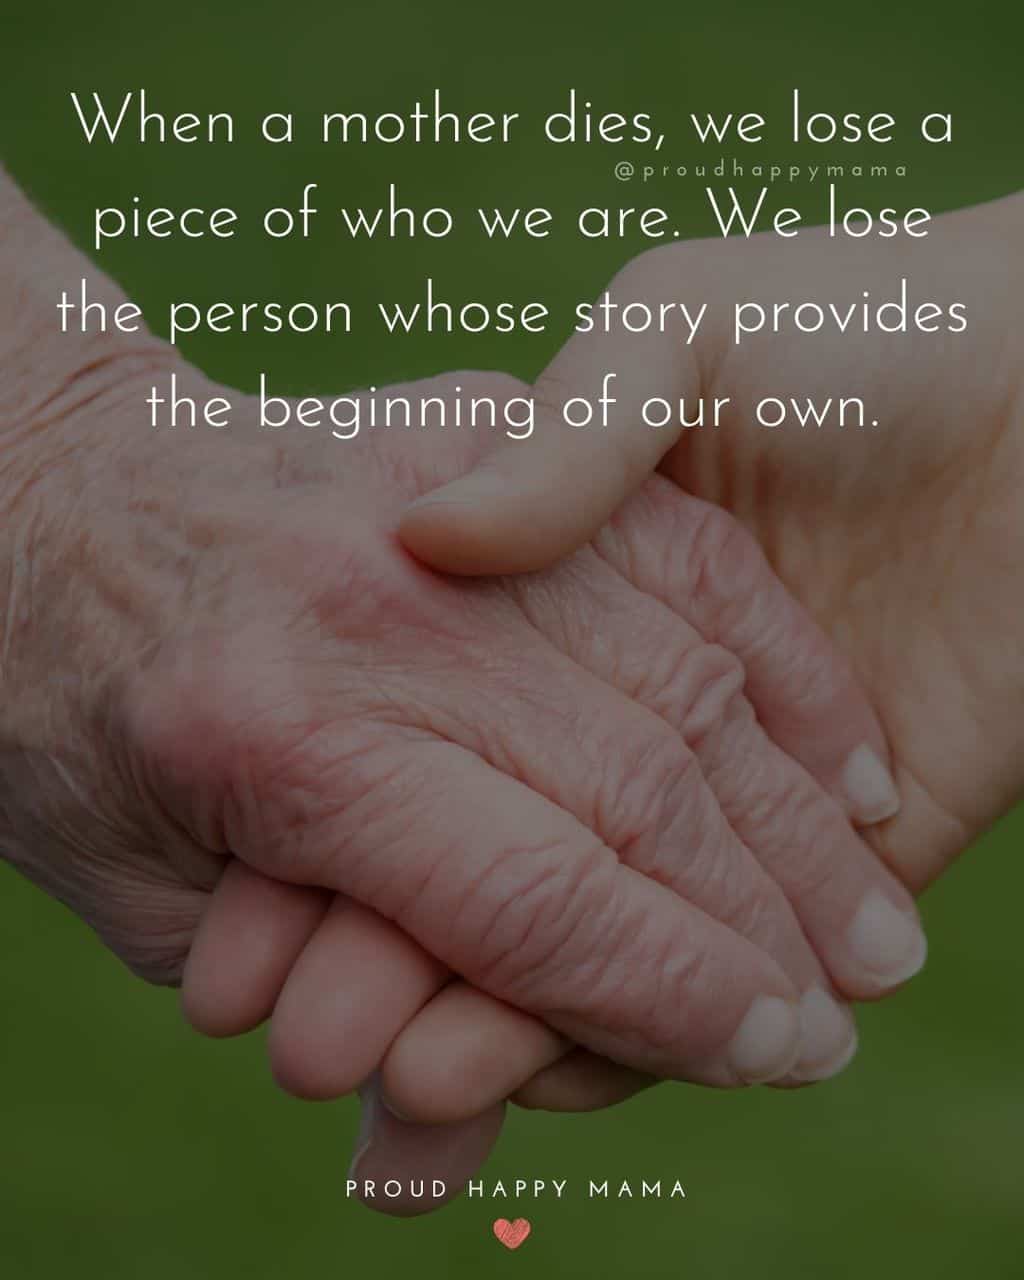 Elderly woman's hand holding woman's hand with text overlay, ‘When a mother dies, we lose a piece of who we are. We lose the person whose story provides the beginning of our own.’